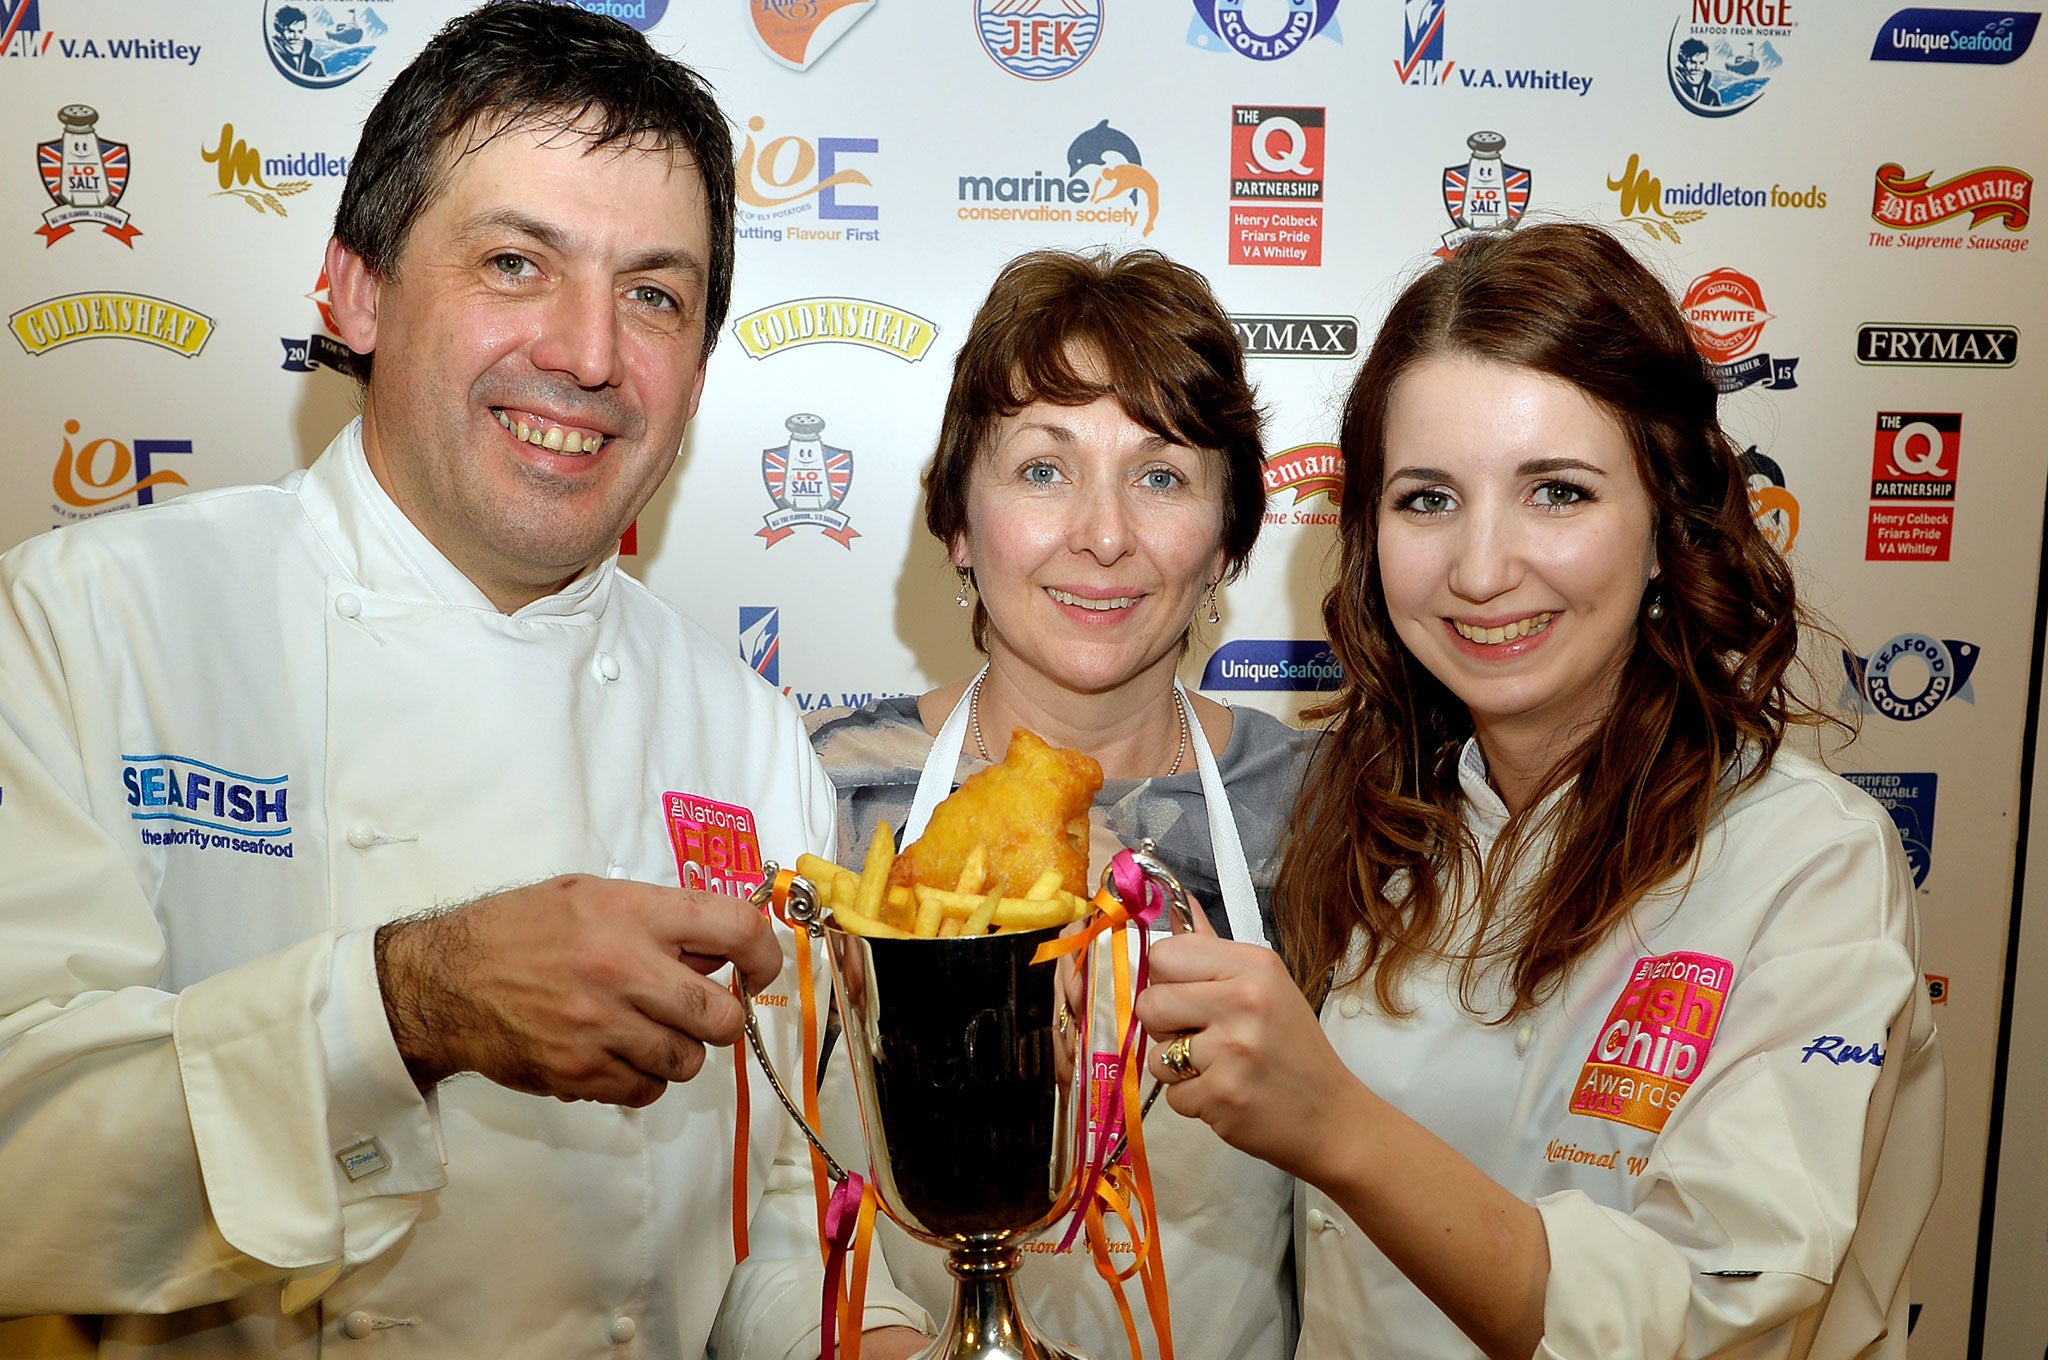 Manager John Gold, owner Valerie Johnson and her daughter Carlyn Johnson from the Fryer of Frankie's celebrate winning the UK's Best Independent Takeaway Fish and Chip Shop of the Year